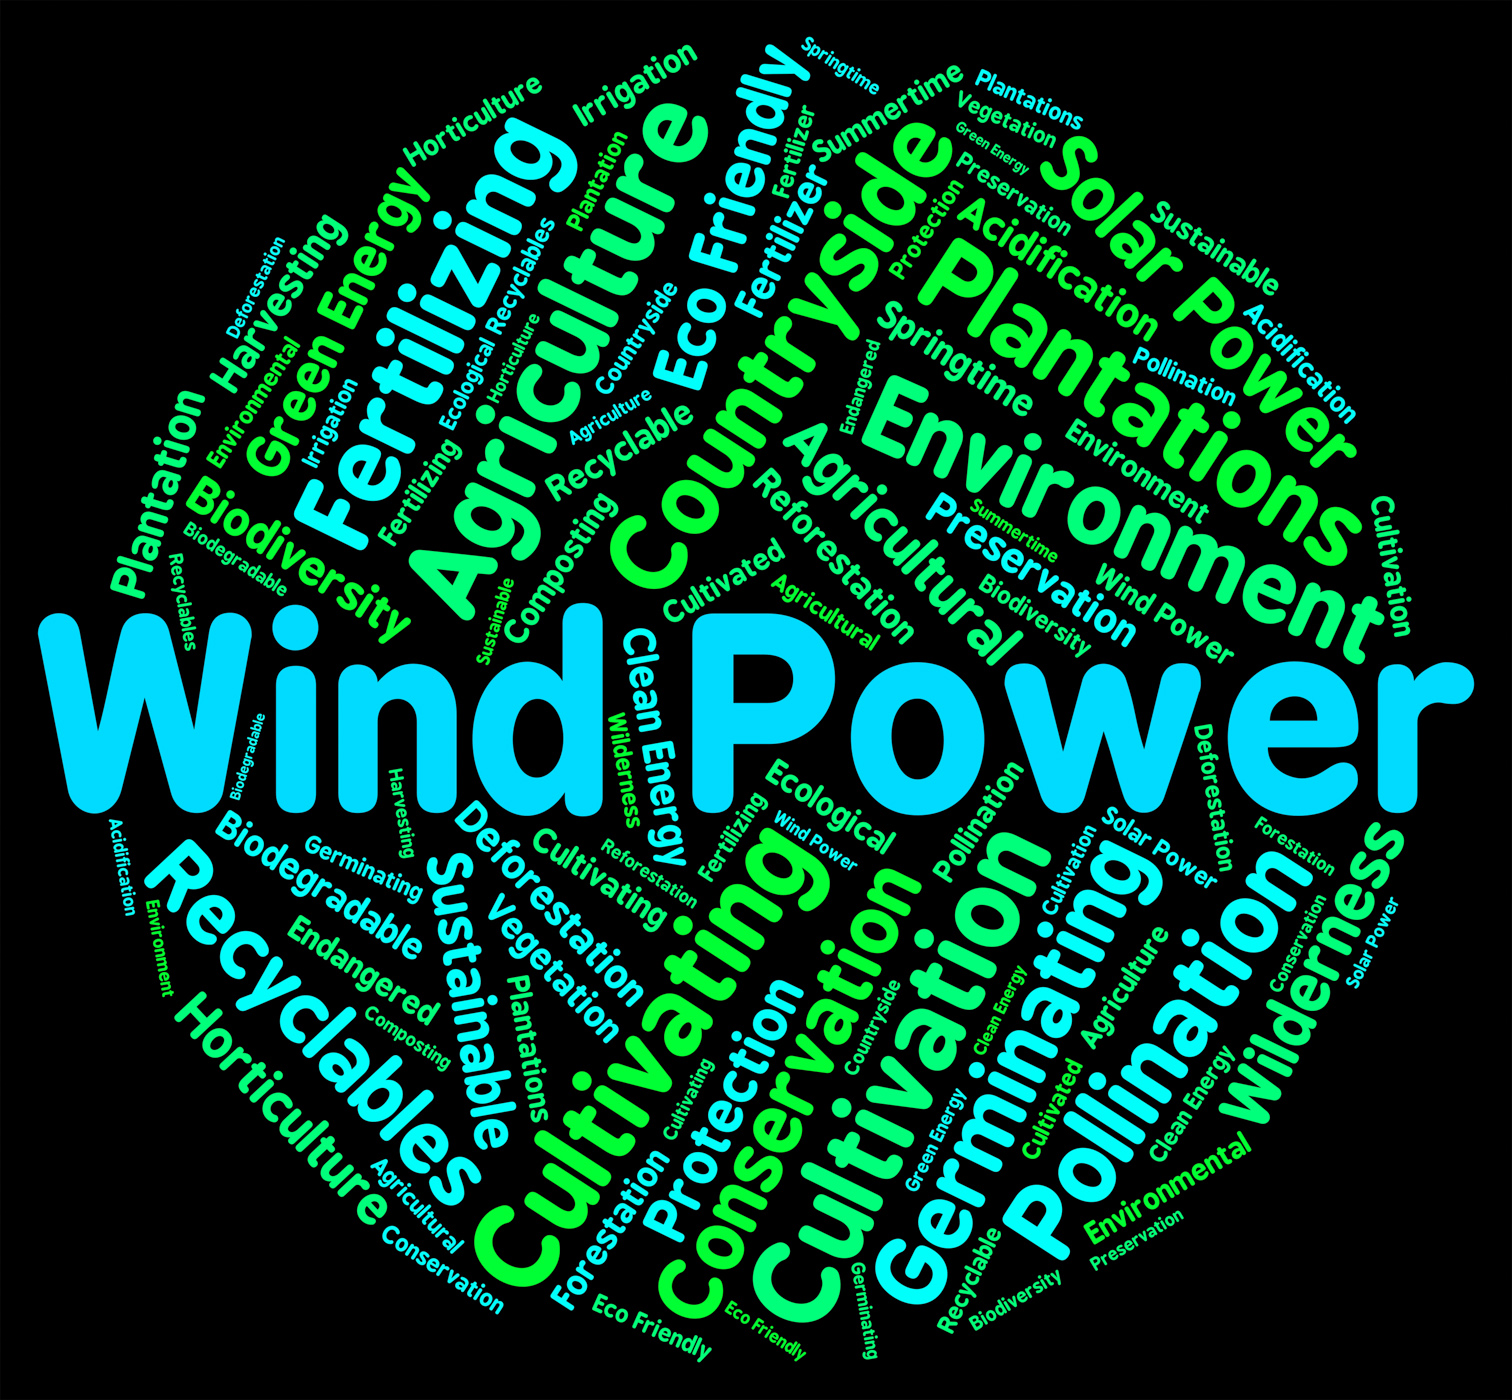 Wind power means renewable resource and generate photo